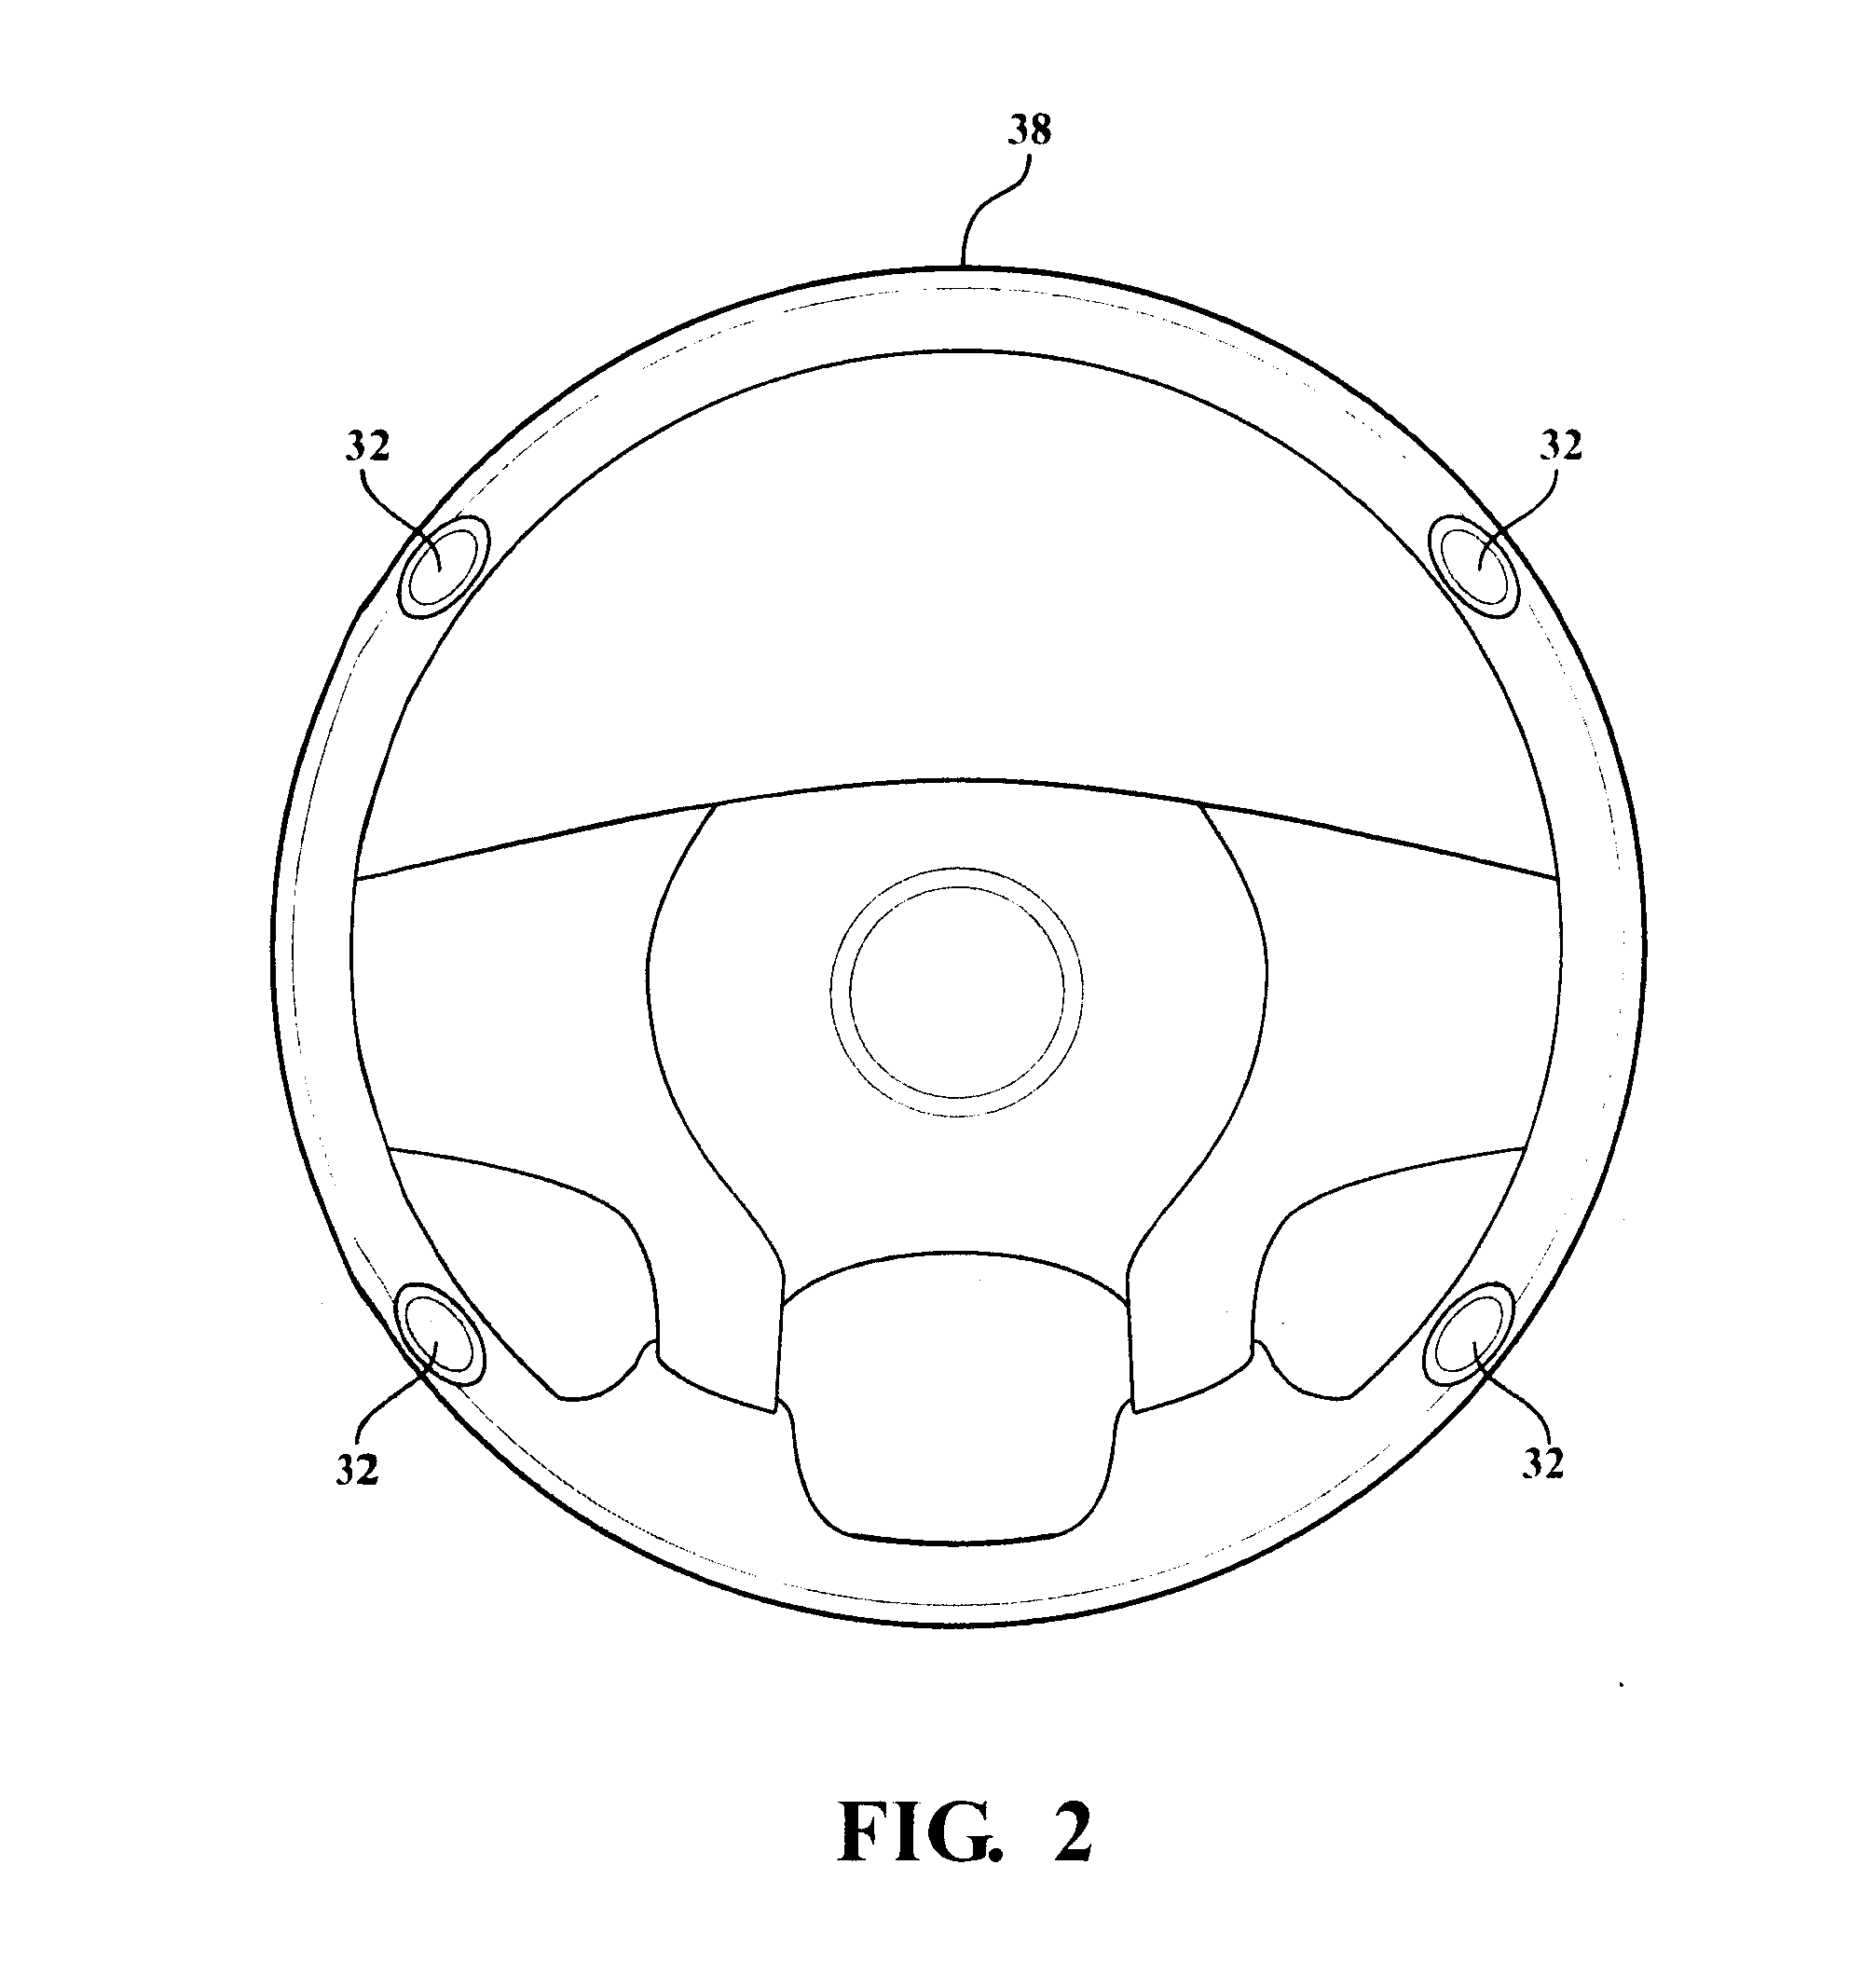 Method and system for controlling the behavior of an occupant of a vehicle